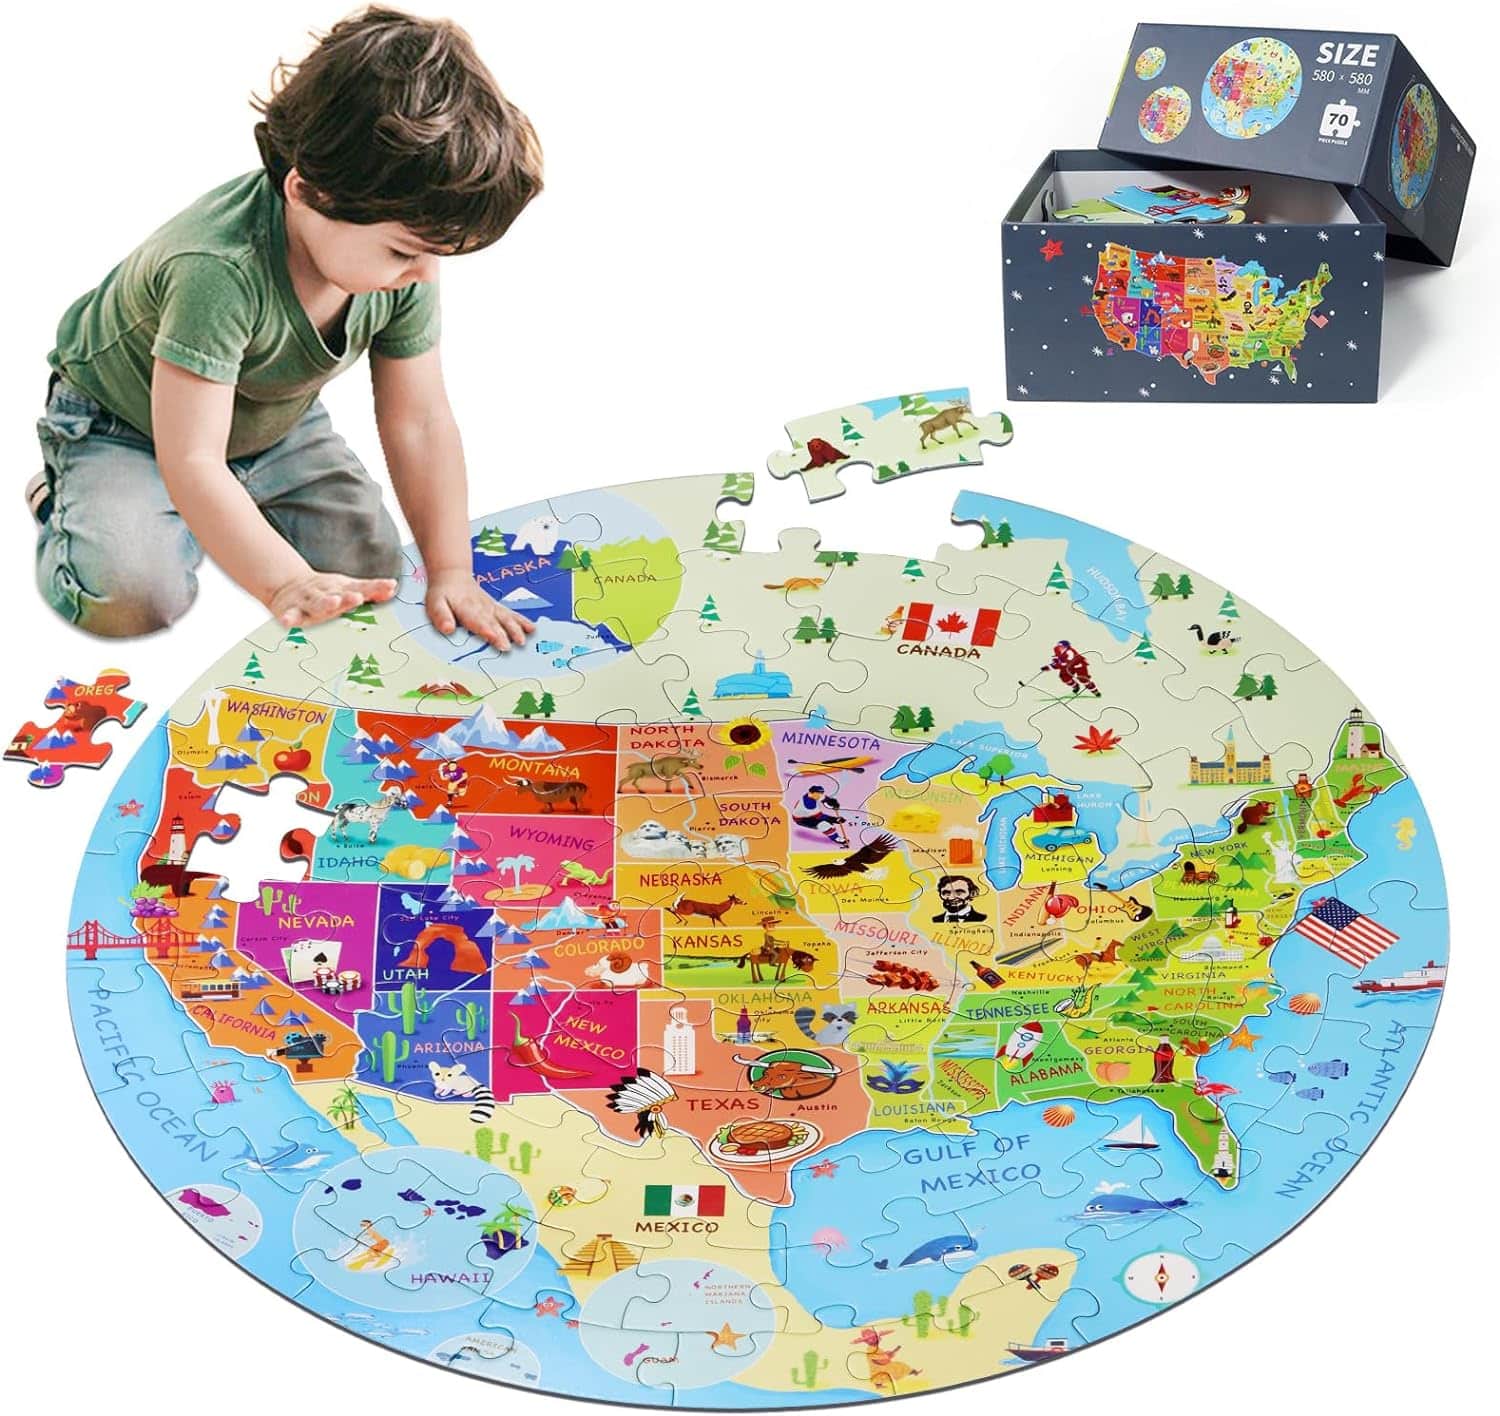 DIGOBAY United States Puzzle 70 Pieces USA Map Floor Jigsaw Puzzles for Kids Ages 4-10, Jumbo Round US Geography Puzzle 50 States with Capitals Educational Learning Toys for Boy or Girl